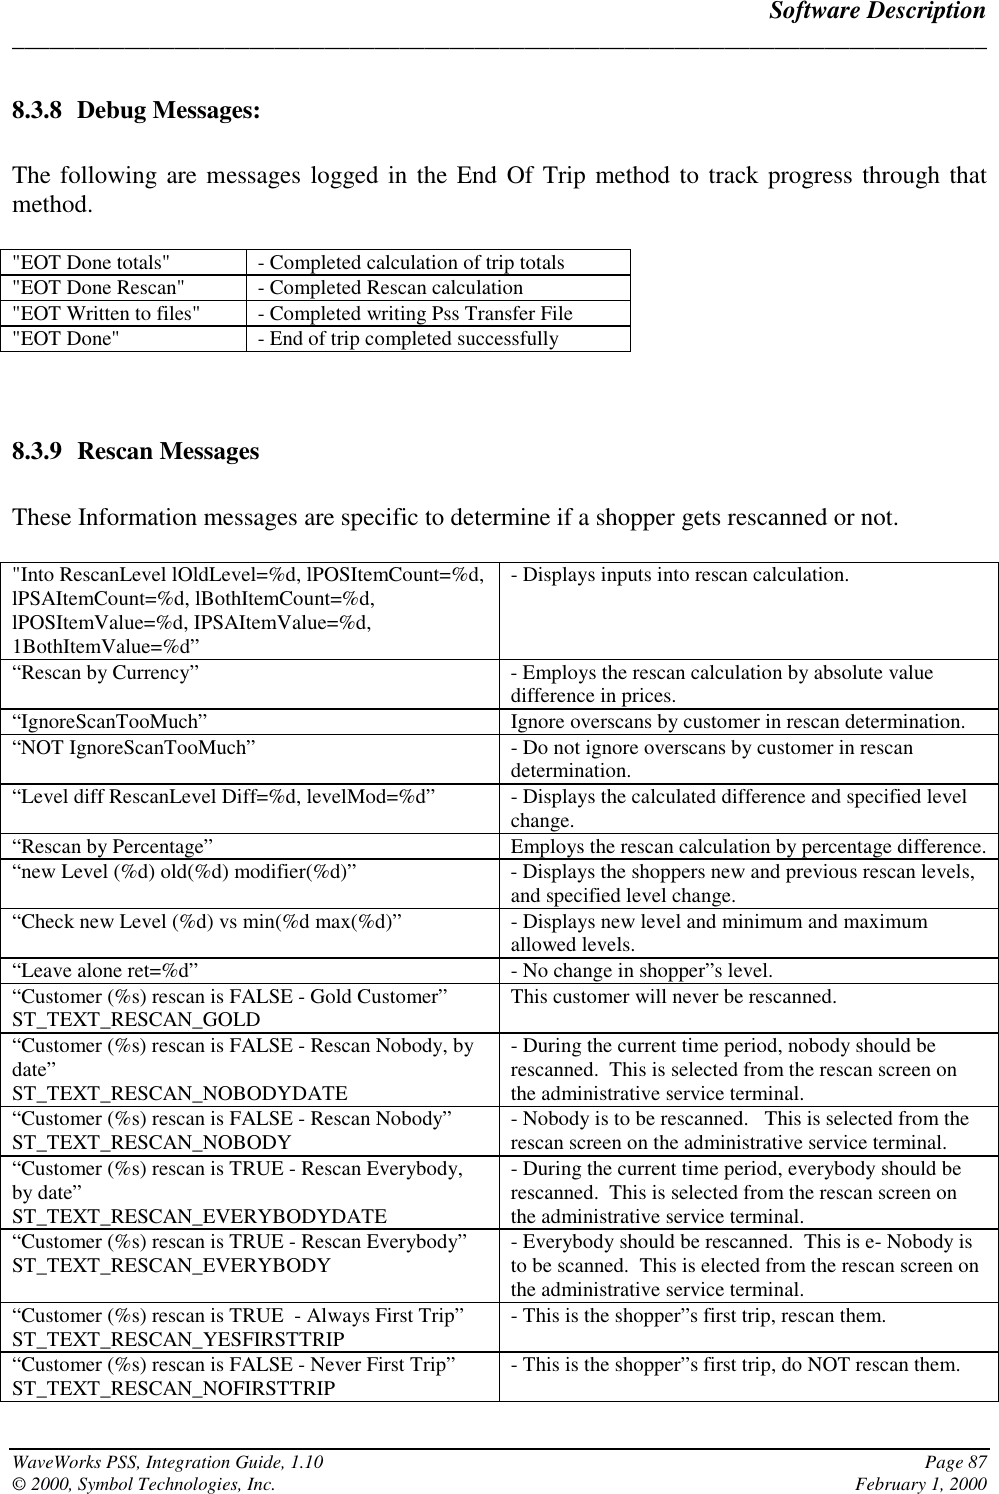 Software Description______________________________________________________________________________WaveWorks PSS, Integration Guide, 1.10 Page 87© 2000, Symbol Technologies, Inc. February 1, 20008.3.8 Debug Messages:The following are messages logged in the End Of Trip method to track progress through thatmethod.&quot;EOT Done totals&quot; - Completed calculation of trip totals&quot;EOT Done Rescan&quot; - Completed Rescan calculation&quot;EOT Written to files&quot; - Completed writing Pss Transfer File&quot;EOT Done&quot; - End of trip completed successfully8.3.9 Rescan MessagesThese Information messages are specific to determine if a shopper gets rescanned or not.&quot;Into RescanLevel lOldLevel=%d, lPOSItemCount=%d,lPSAItemCount=%d, lBothItemCount=%d,lPOSItemValue=%d, IPSAItemValue=%d,1BothItemValue=%d”- Displays inputs into rescan calculation.“Rescan by Currency” - Employs the rescan calculation by absolute valuedifference in prices.“IgnoreScanTooMuch” Ignore overscans by customer in rescan determination.“NOT IgnoreScanTooMuch” - Do not ignore overscans by customer in rescandetermination.“Level diff RescanLevel Diff=%d, levelMod=%d” - Displays the calculated difference and specified levelchange.“Rescan by Percentage” Employs the rescan calculation by percentage difference.“new Level (%d) old(%d) modifier(%d)” - Displays the shoppers new and previous rescan levels,and specified level change.“Check new Level (%d) vs min(%d max(%d)” - Displays new level and minimum and maximumallowed levels.“Leave alone ret=%d” - No change in shopper”s level.“Customer (%s) rescan is FALSE - Gold Customer”ST_TEXT_RESCAN_GOLD This customer will never be rescanned.“Customer (%s) rescan is FALSE - Rescan Nobody, bydate”ST_TEXT_RESCAN_NOBODYDATE- During the current time period, nobody should berescanned.  This is selected from the rescan screen onthe administrative service terminal.“Customer (%s) rescan is FALSE - Rescan Nobody”ST_TEXT_RESCAN_NOBODY - Nobody is to be rescanned.   This is selected from therescan screen on the administrative service terminal.“Customer (%s) rescan is TRUE - Rescan Everybody,by date”ST_TEXT_RESCAN_EVERYBODYDATE- During the current time period, everybody should berescanned.  This is selected from the rescan screen onthe administrative service terminal.“Customer (%s) rescan is TRUE - Rescan Everybody”ST_TEXT_RESCAN_EVERYBODY - Everybody should be rescanned.  This is e- Nobody isto be scanned.  This is elected from the rescan screen onthe administrative service terminal.“Customer (%s) rescan is TRUE  - Always First Trip”ST_TEXT_RESCAN_YESFIRSTTRIP - This is the shopper”s first trip, rescan them.“Customer (%s) rescan is FALSE - Never First Trip”ST_TEXT_RESCAN_NOFIRSTTRIP - This is the shopper”s first trip, do NOT rescan them.